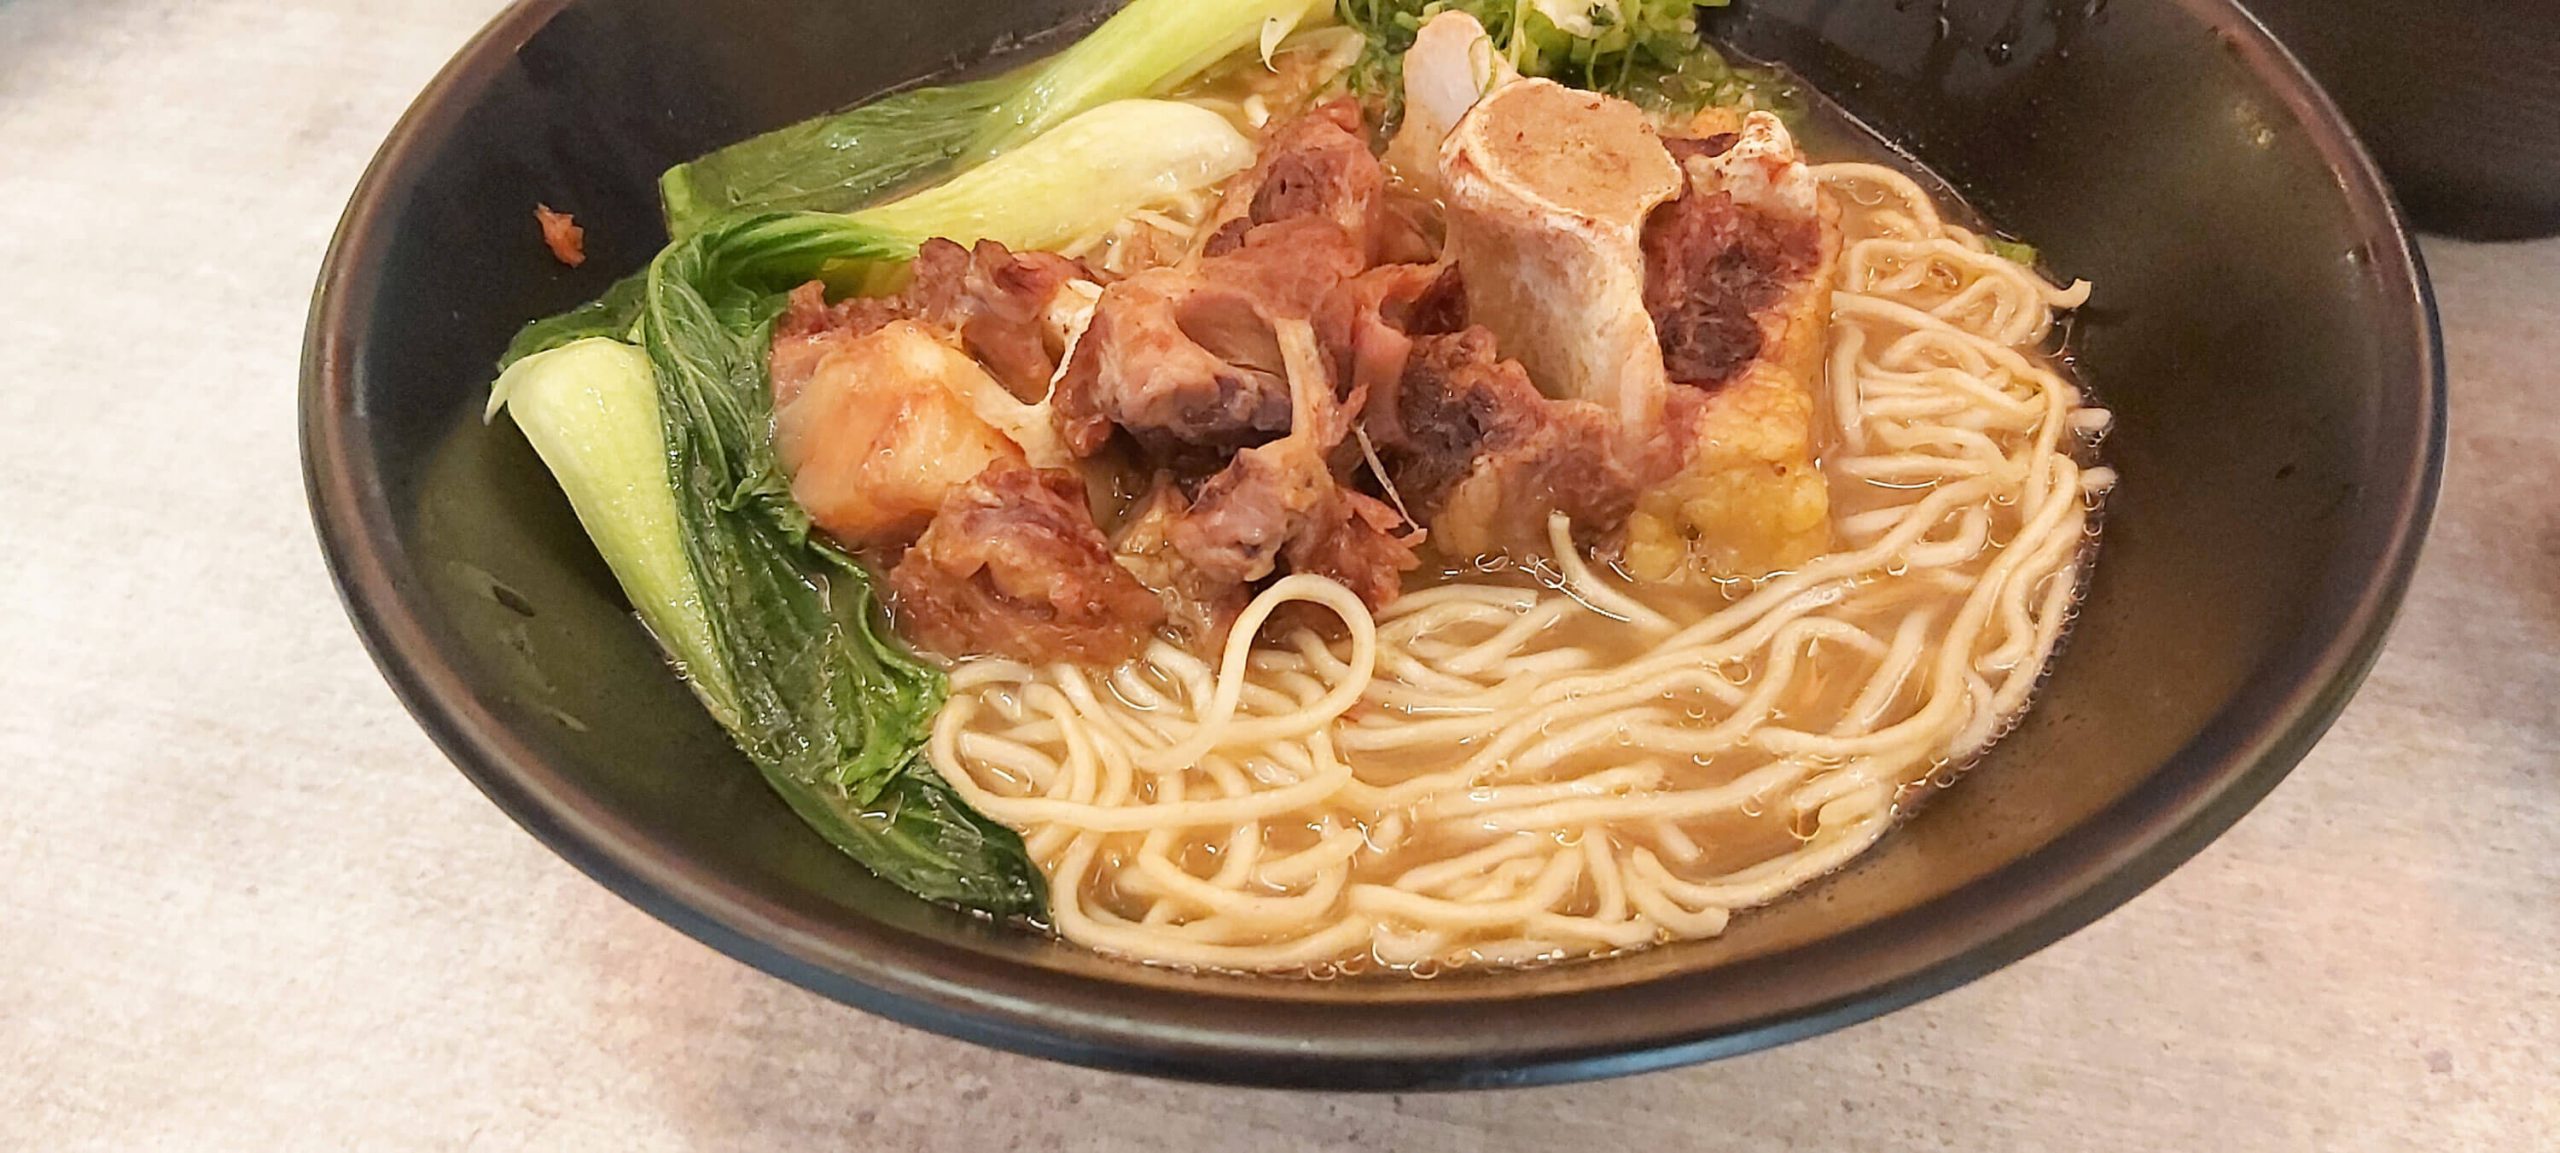 OXTAIL RAMEN. This dish has oxtail meat simmered for 6 hours to bring out the tenderness and flavor. It is served with shiitake mushrooms, bok choi, and green onions over Hakata-style noodles.